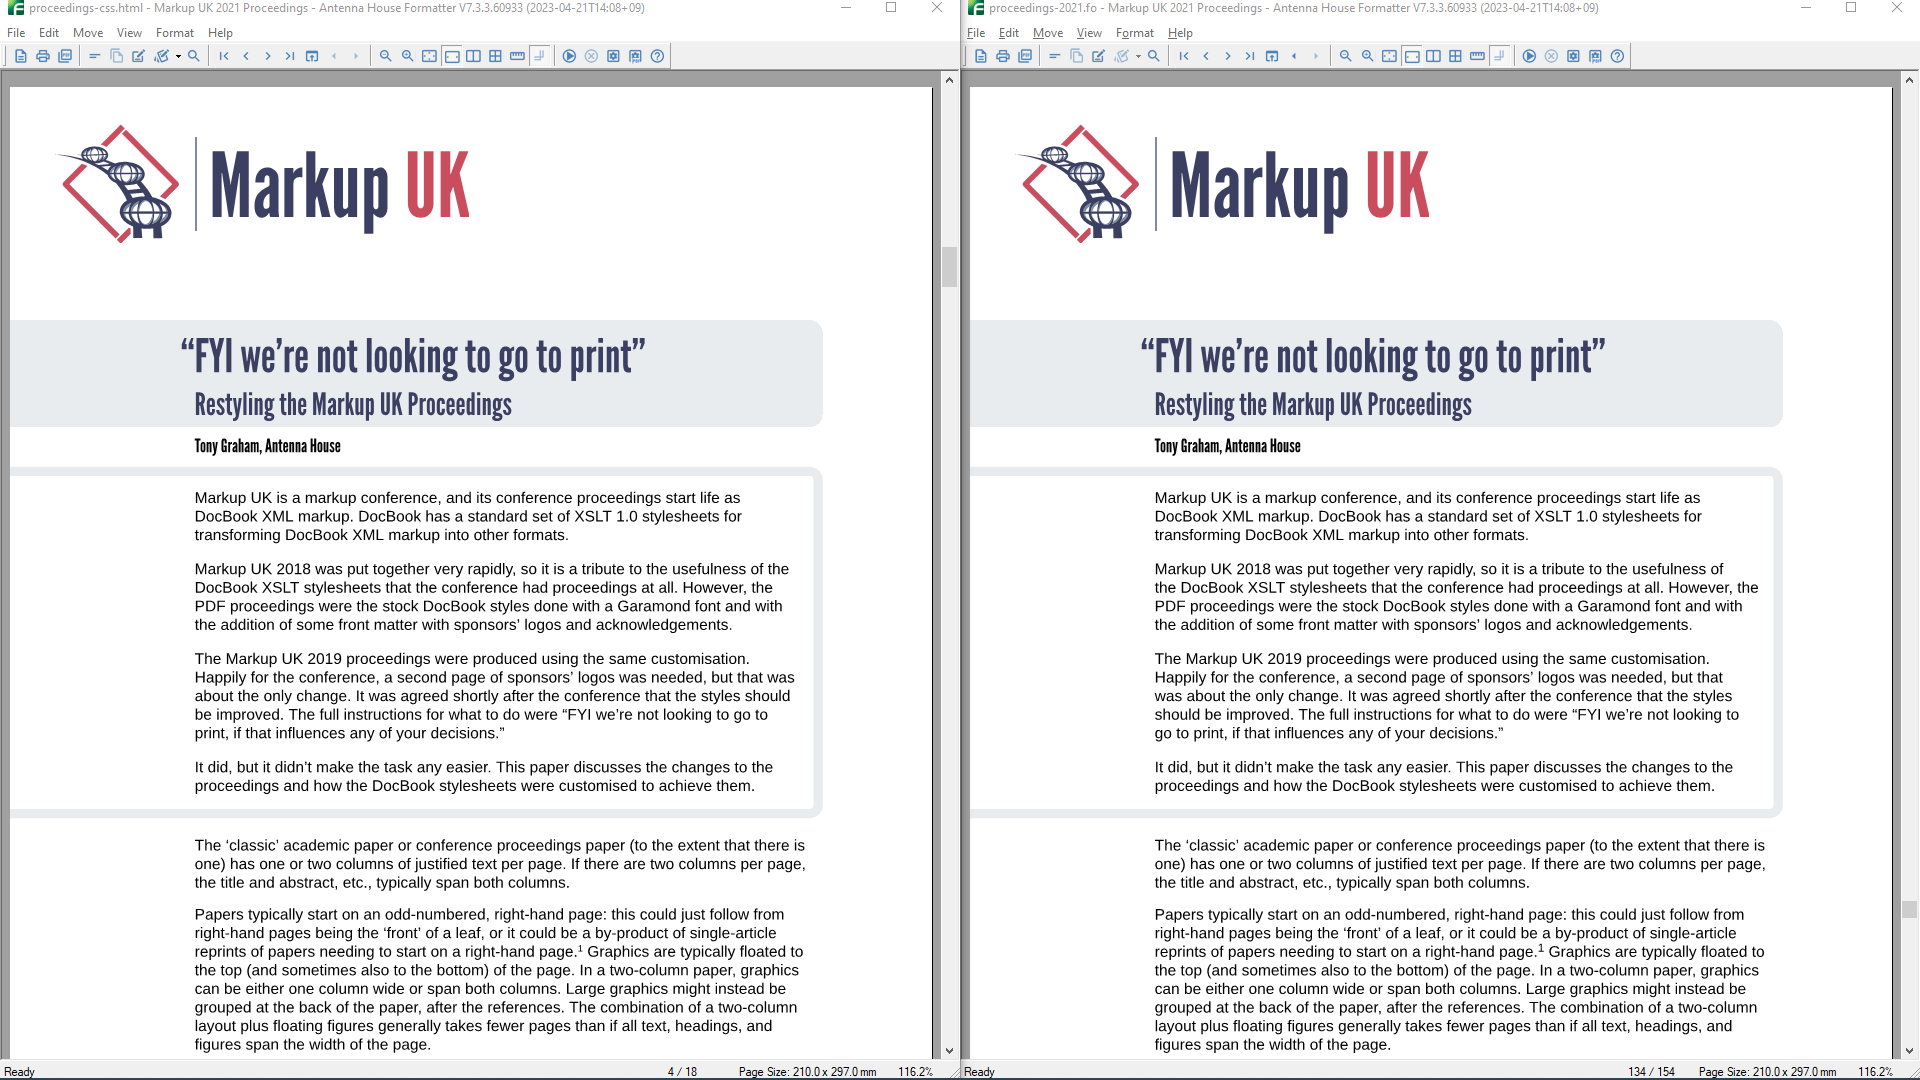 Paper formatted using CSS (left) and XSL-FO (right)